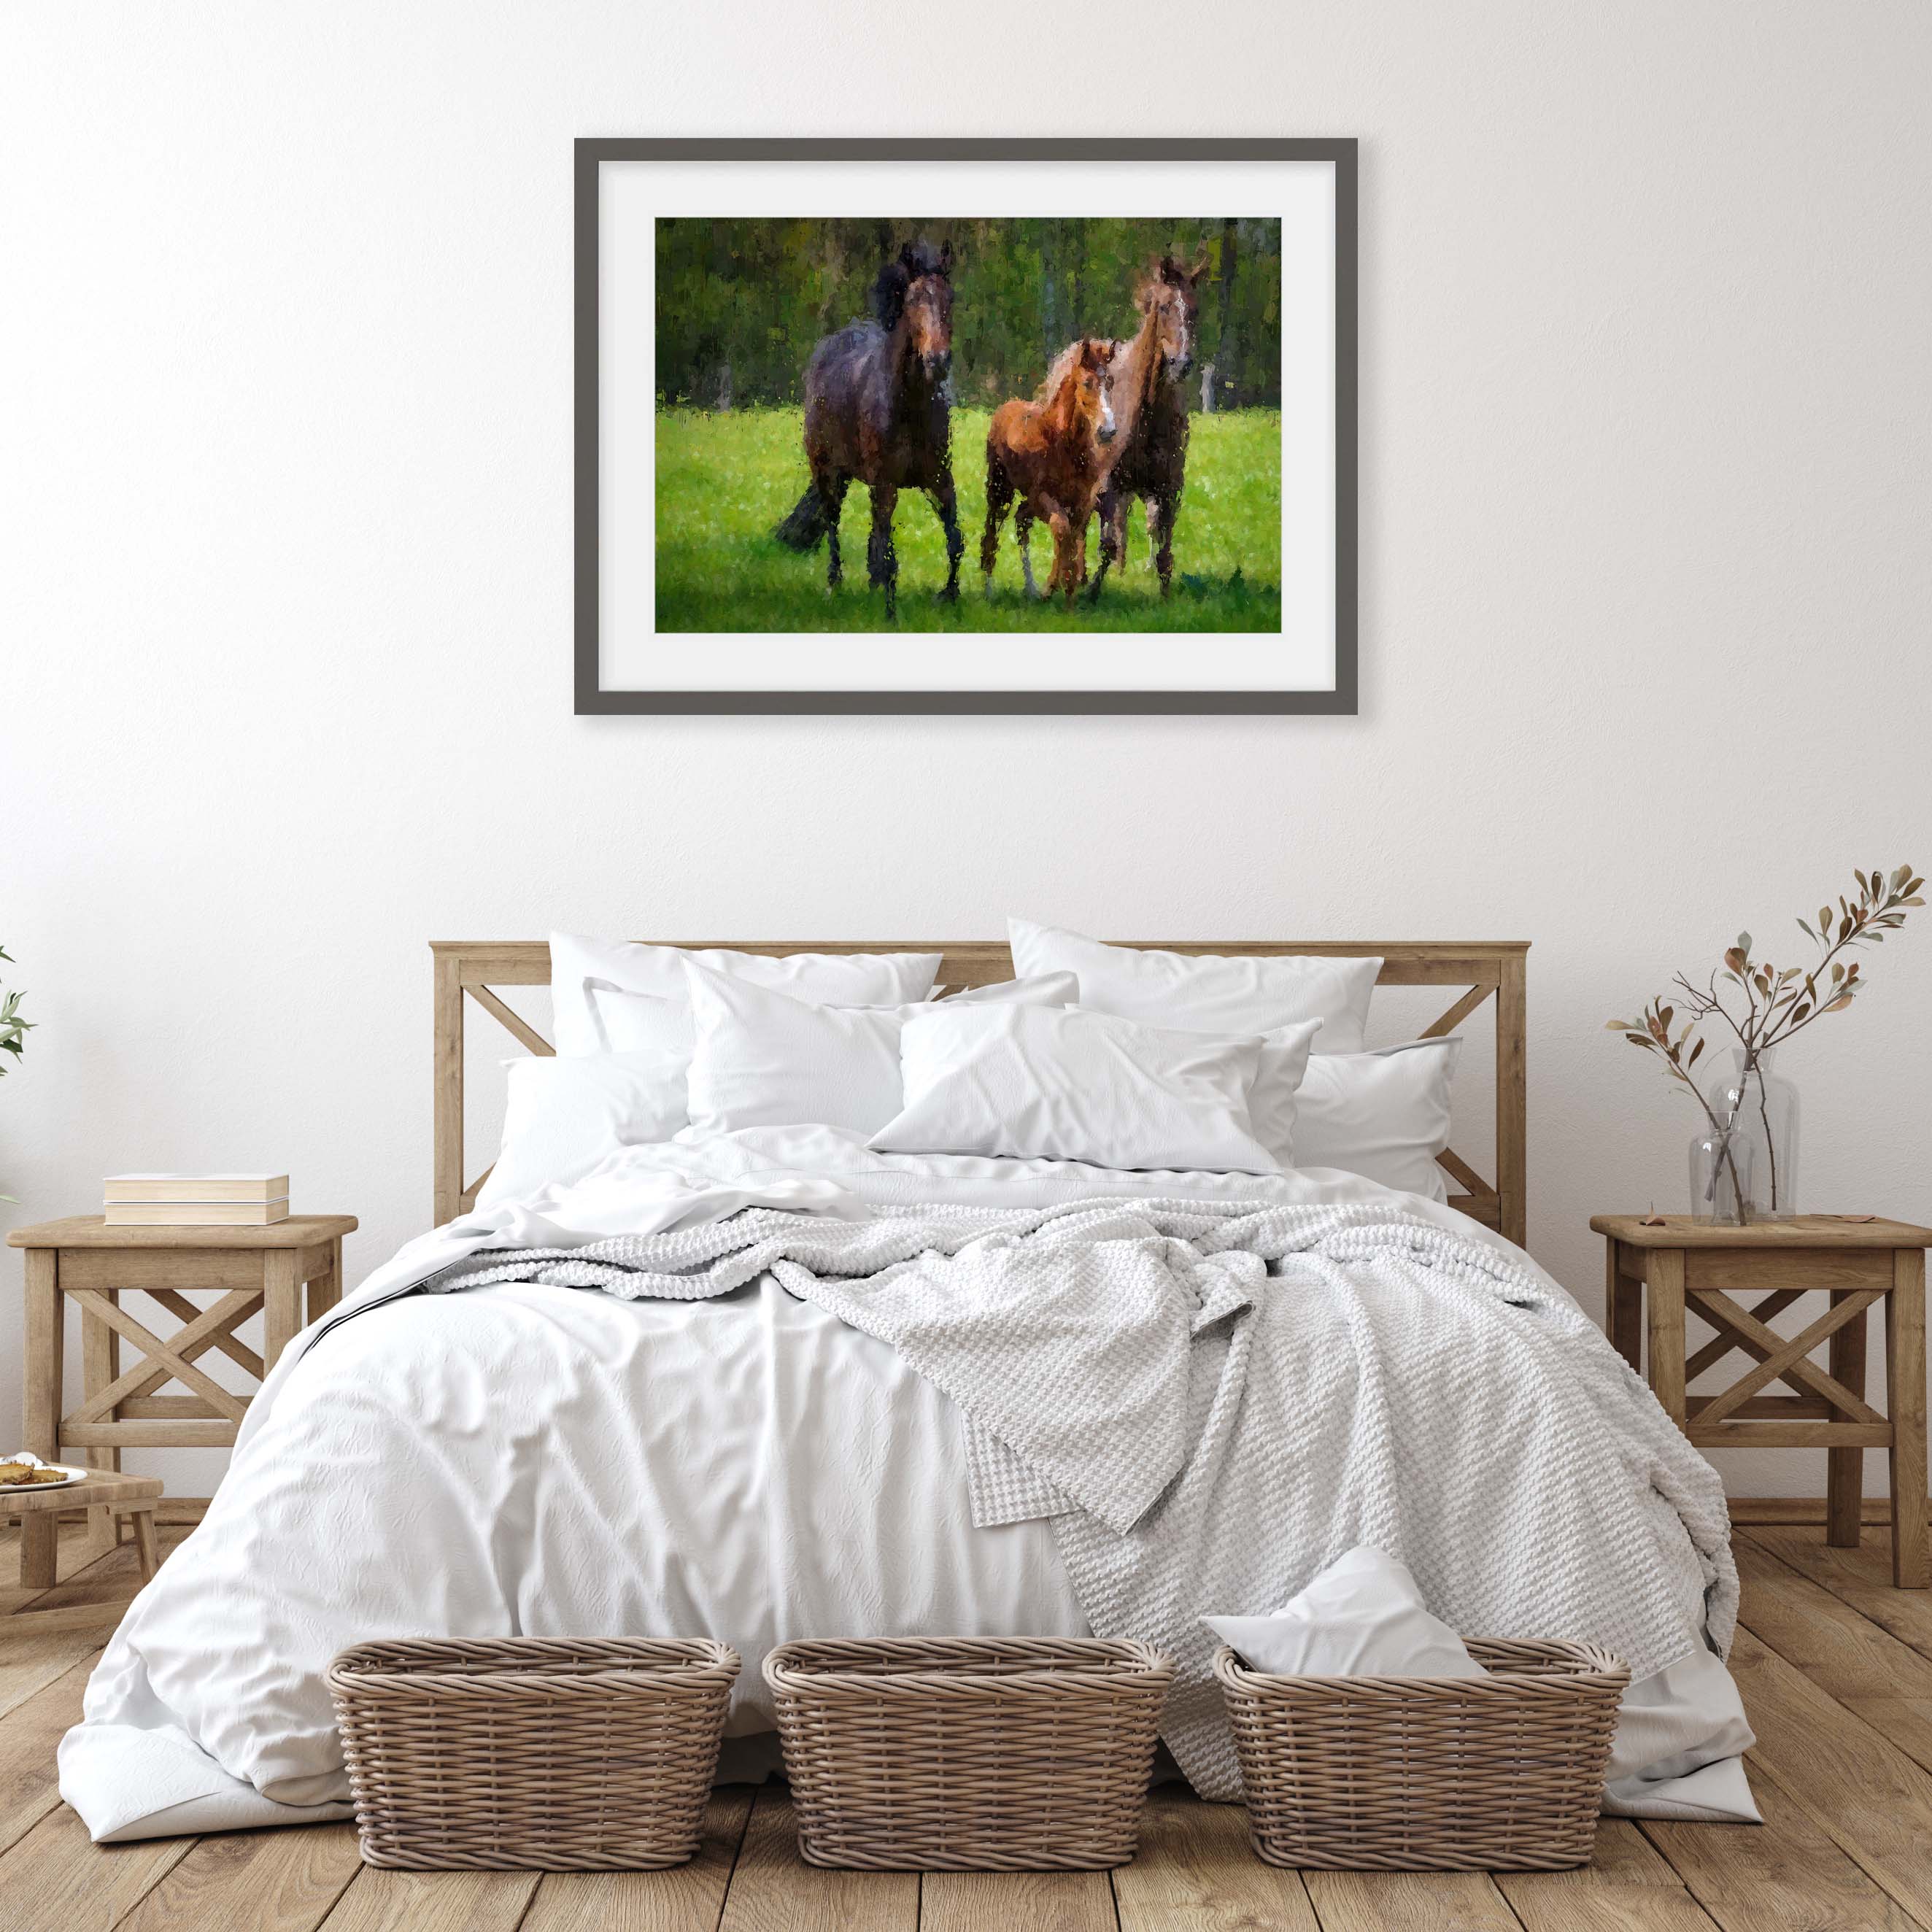 Horses Running In The Field Art Print-Abstract House